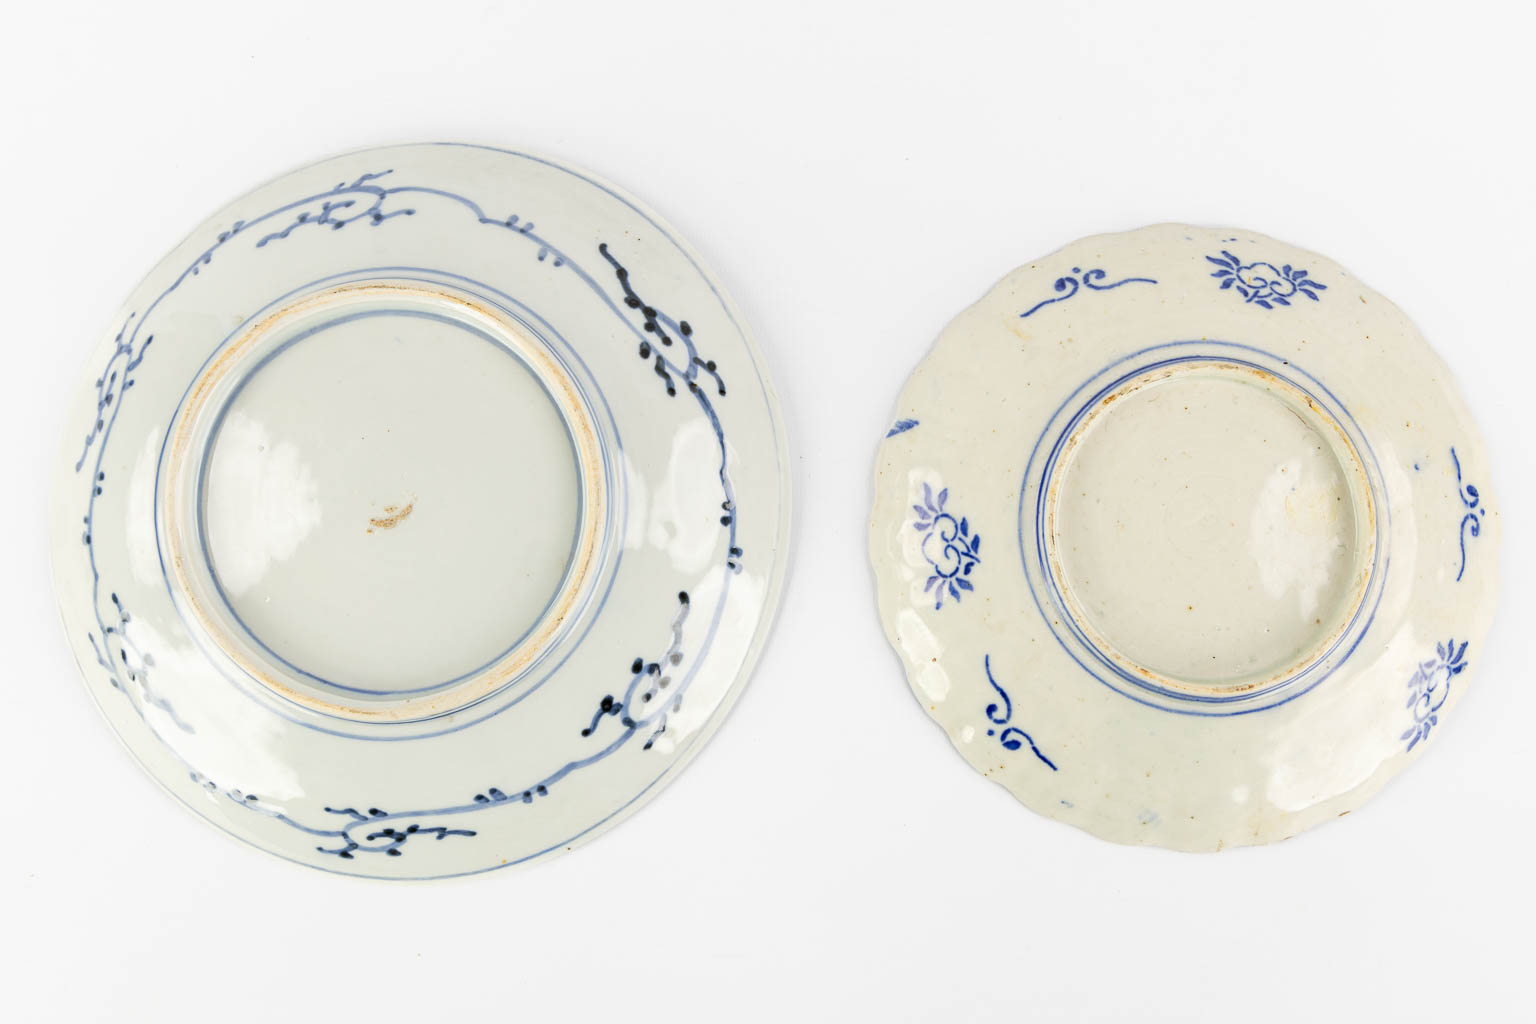 Four plates and two vases, Japan, Imari. 19th and 20th C. (H:34,5 x D:17 cm) - Image 10 of 19